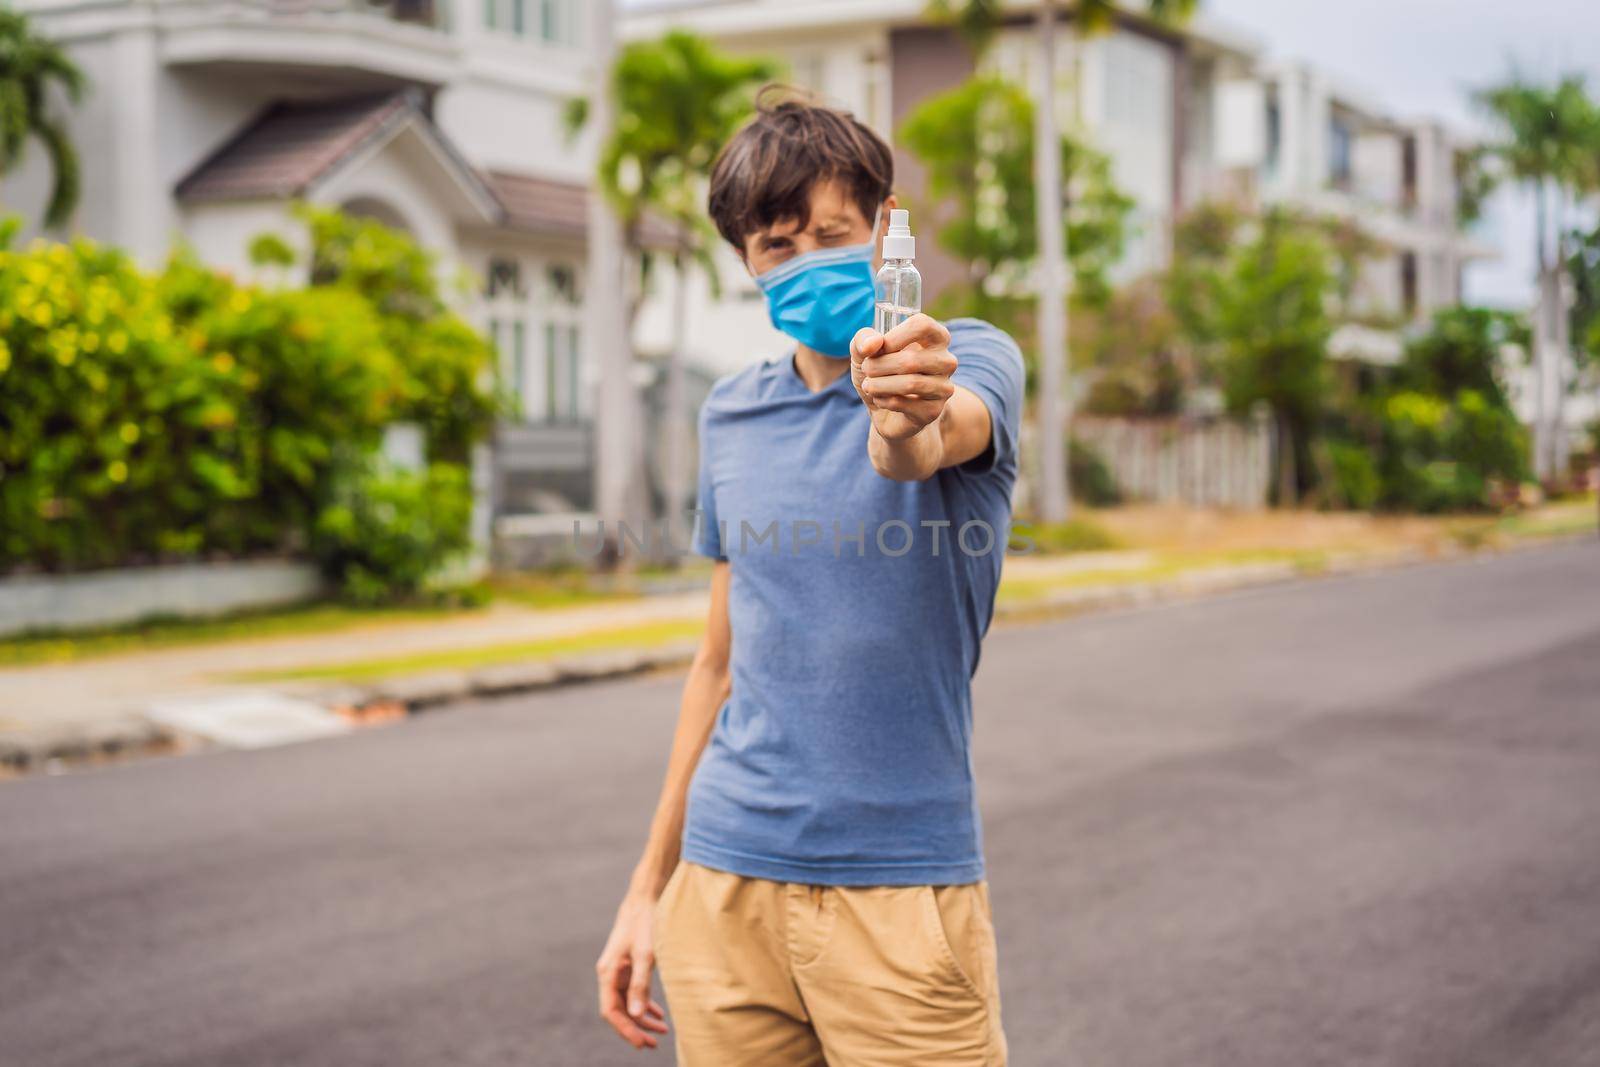 Man in a small town in a medical mask uses a sanitizer because of a coronovirus epidemic by galitskaya